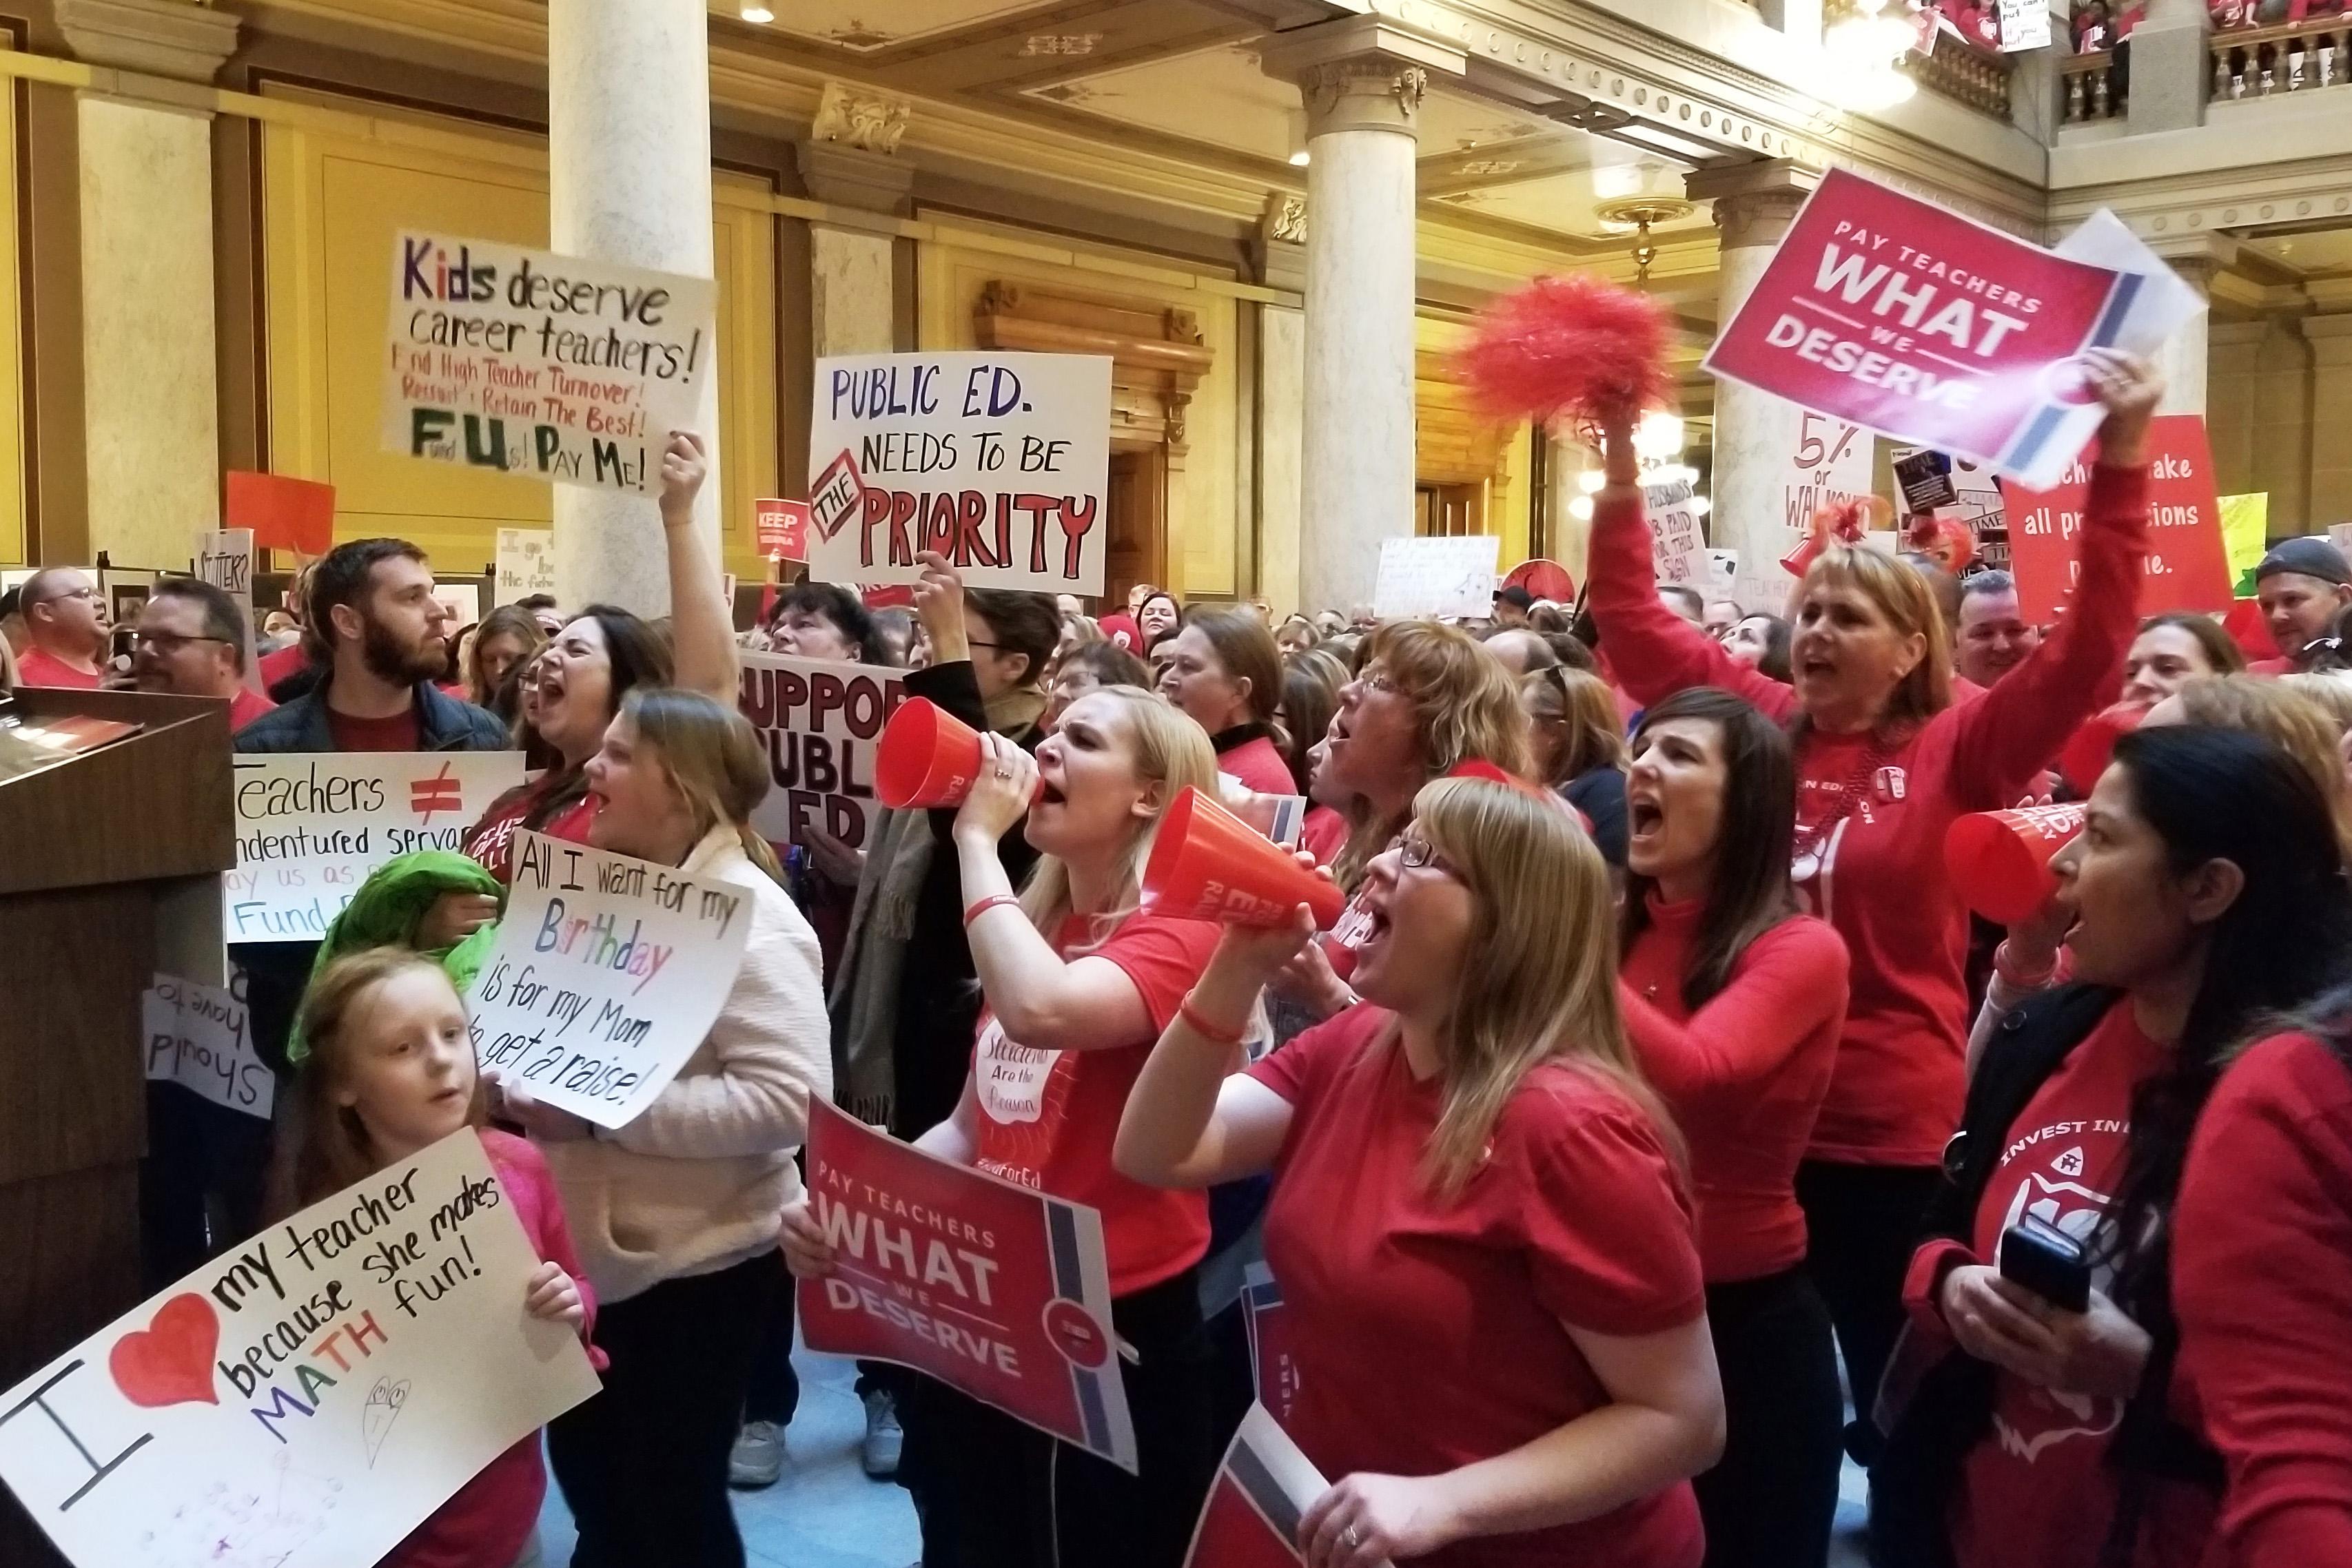 People in red shirts stand in the statehouse holding signs and chanting to support teacher pay